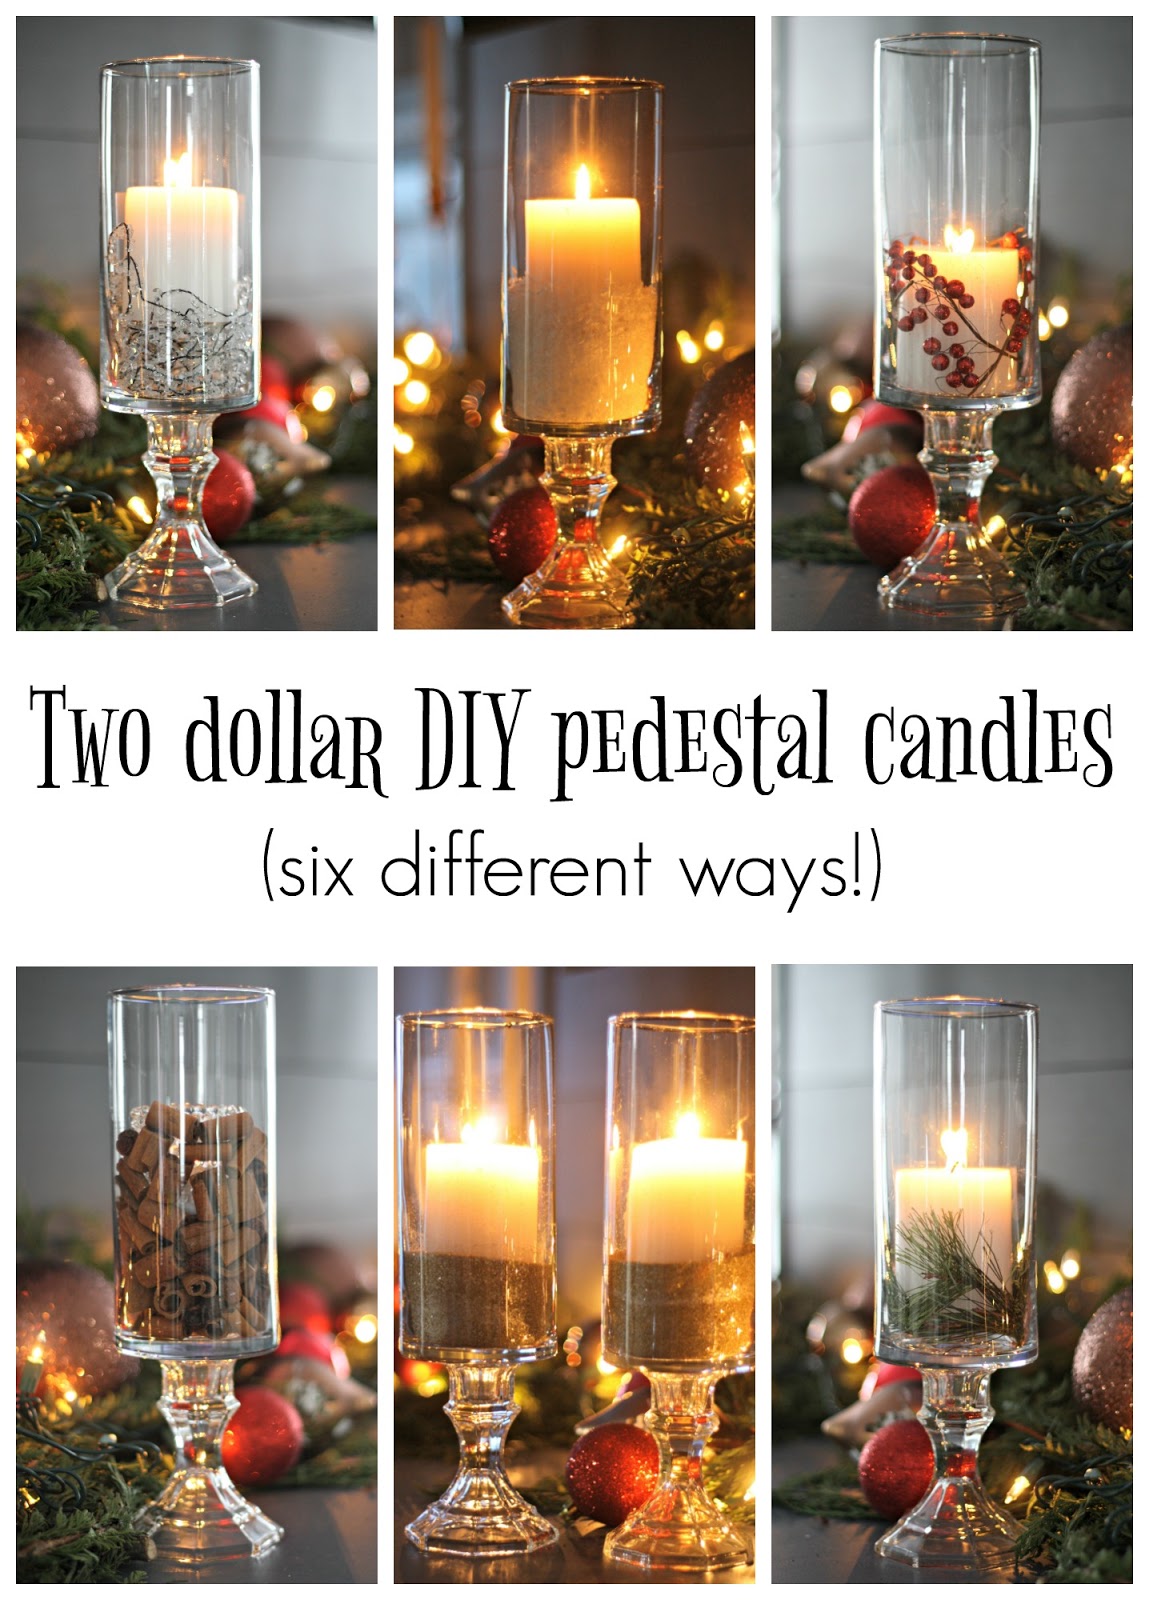 Beautiful DIY pedestal candles (using dollar store items!) from Thrifty